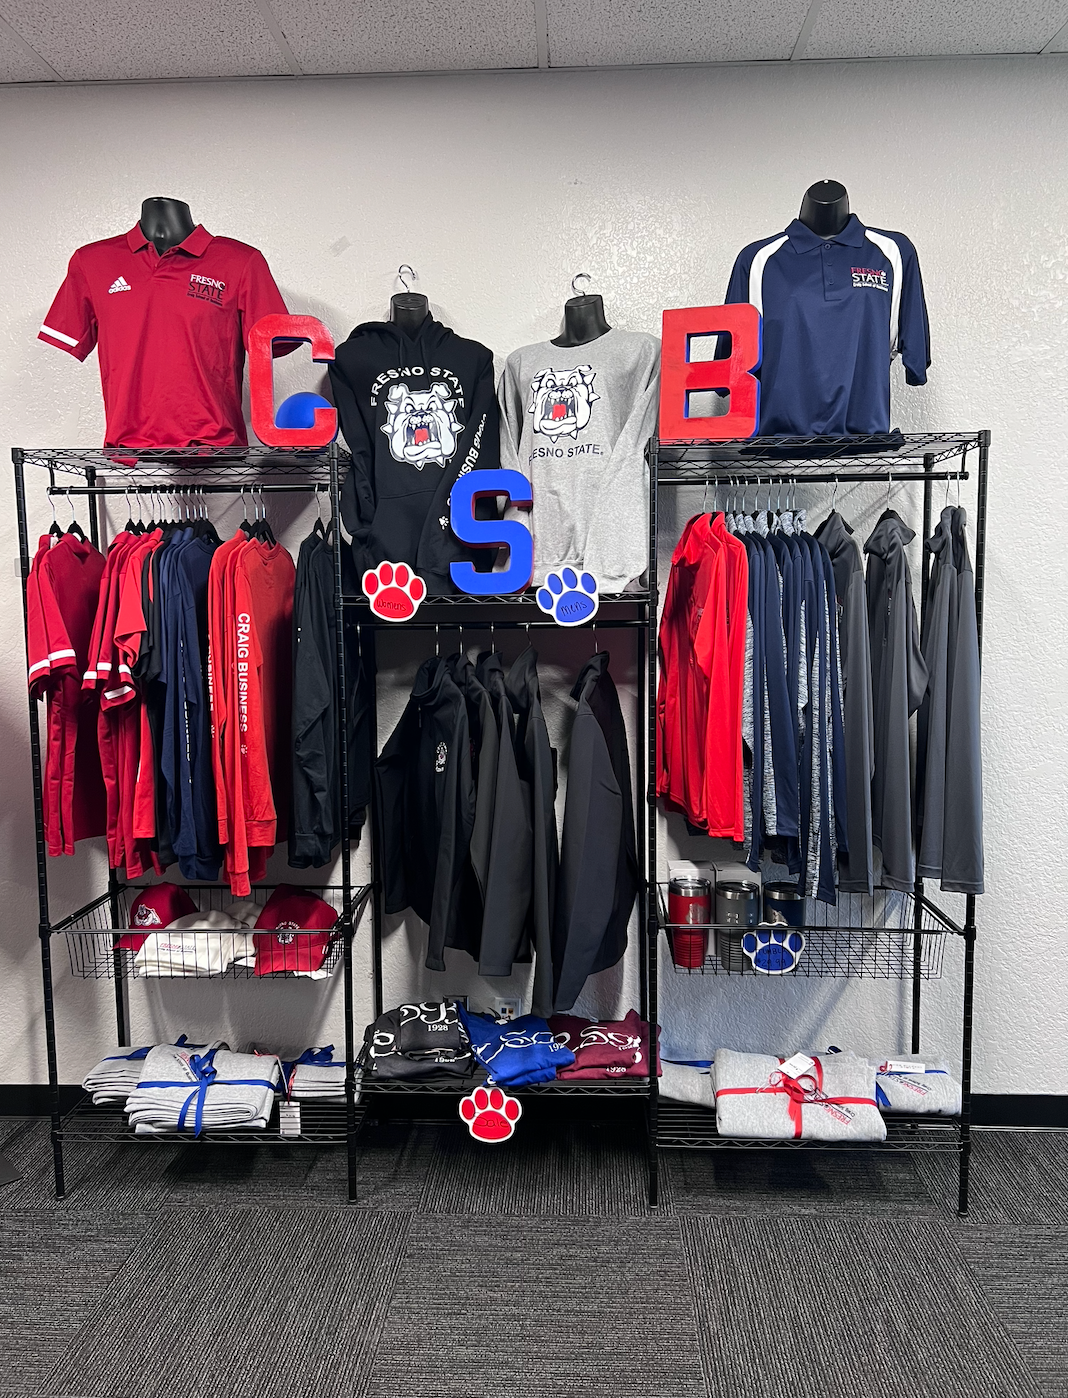 Team Store at Capital One Arena